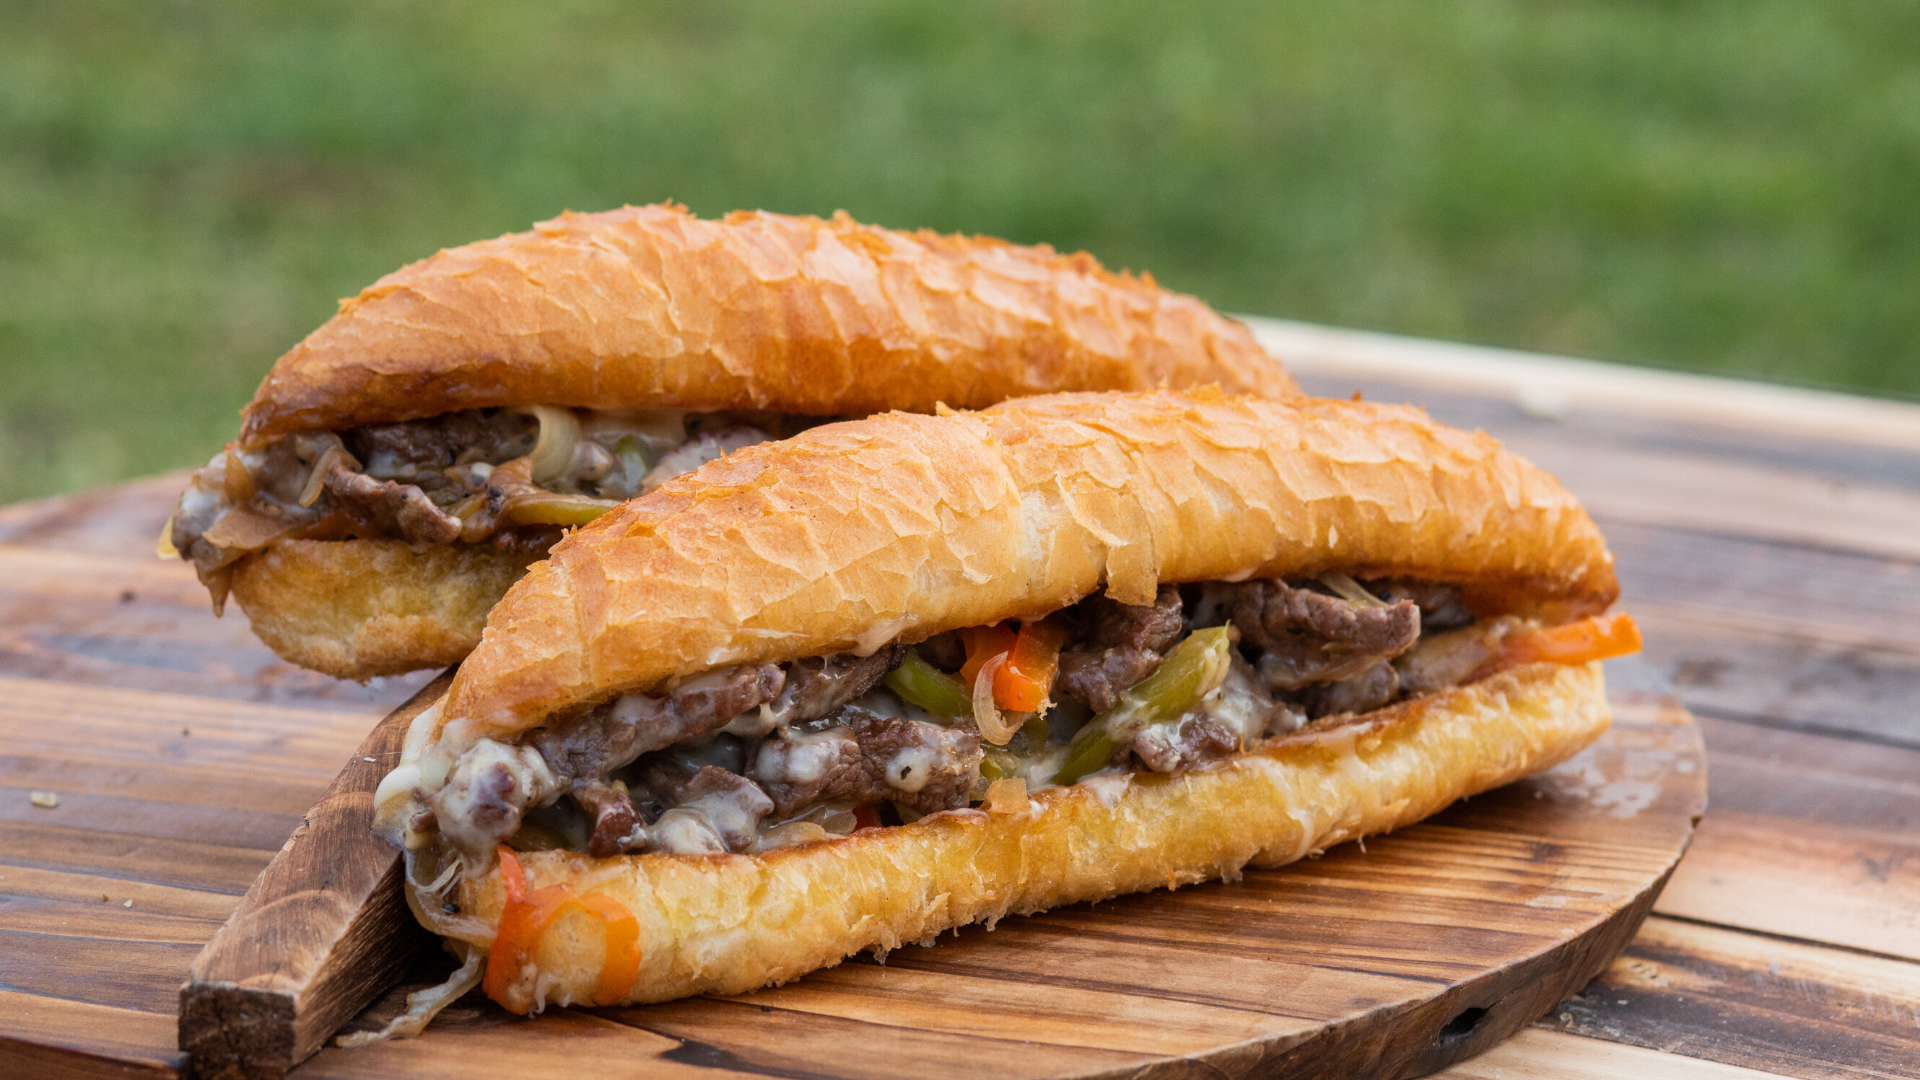 Easy Philly Cheese Steak Recipe